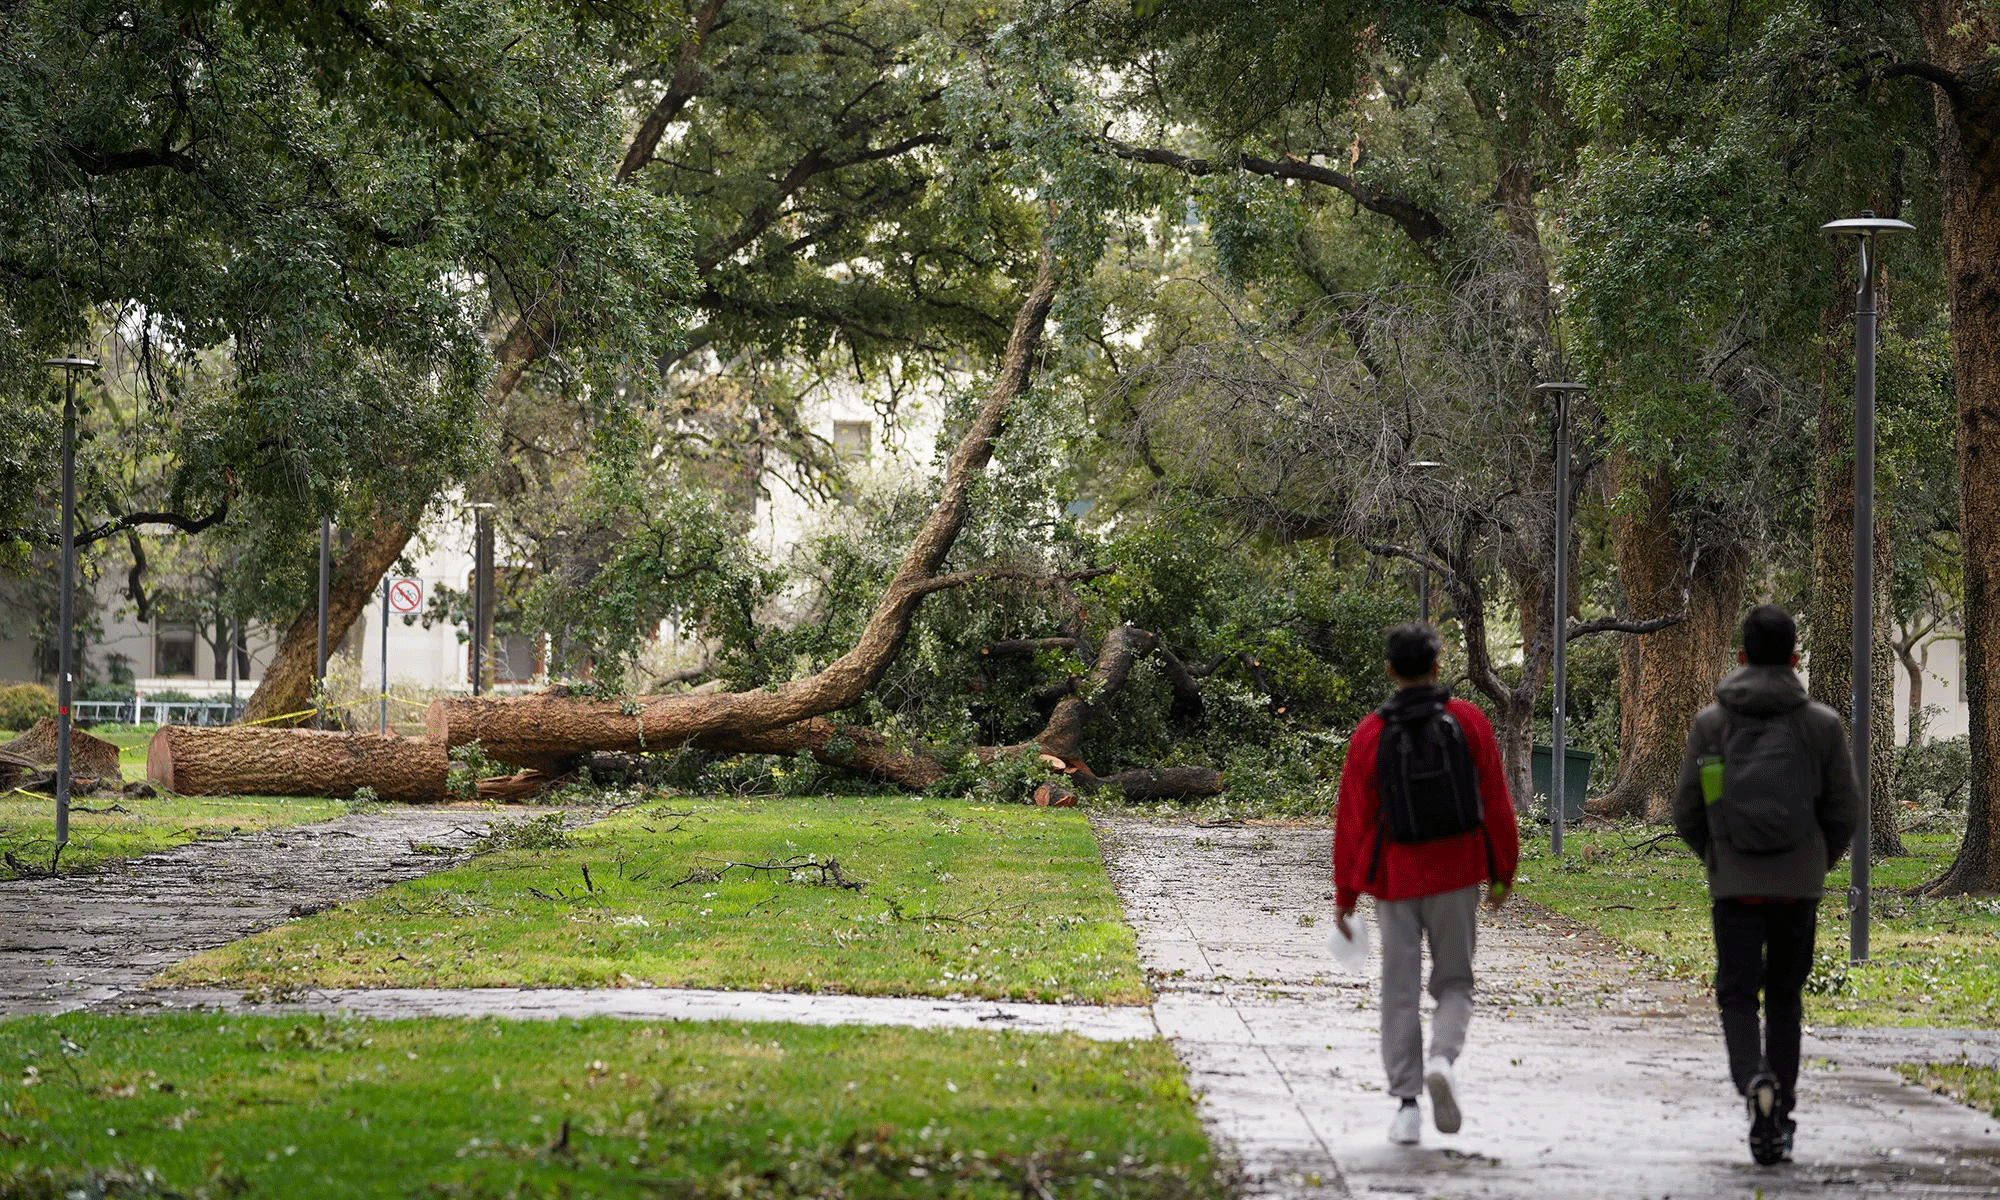 The heavy rains and winds toppled several trees on campus on Jan. 3, 2023. Three oak trees were toppled around Mrak Hall. (Gregory Urquiaga/UC Davis)